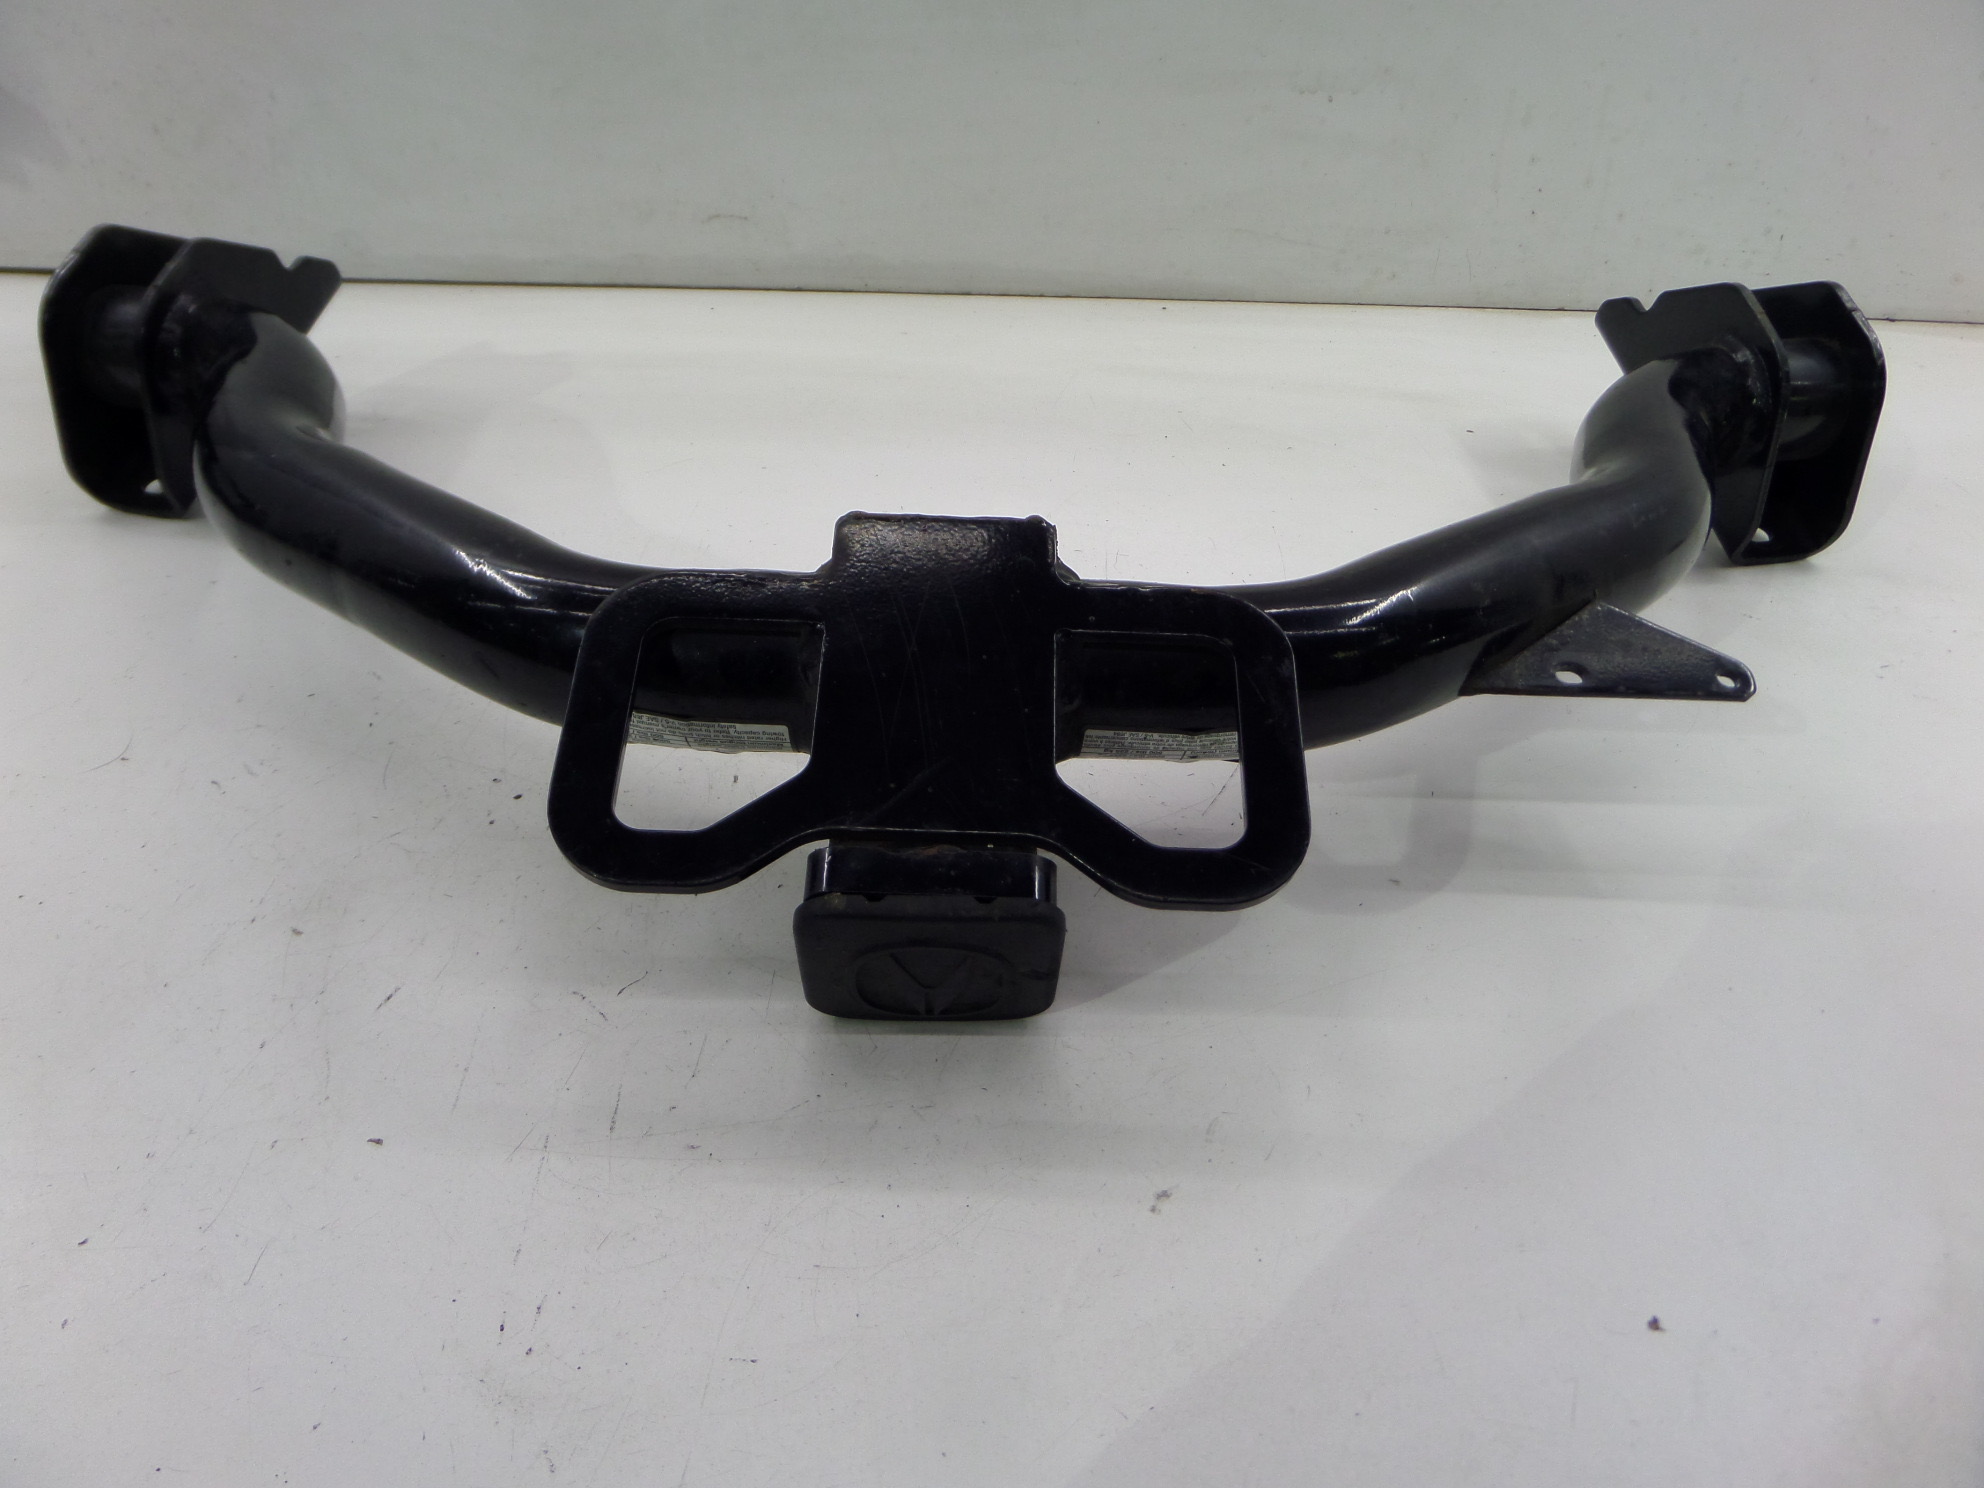 Acura MDX Tow Hitch Towing and Hauling 10-13 OEM Trailer Boat | eBay Acura Mdx Trailer Hitch Oem